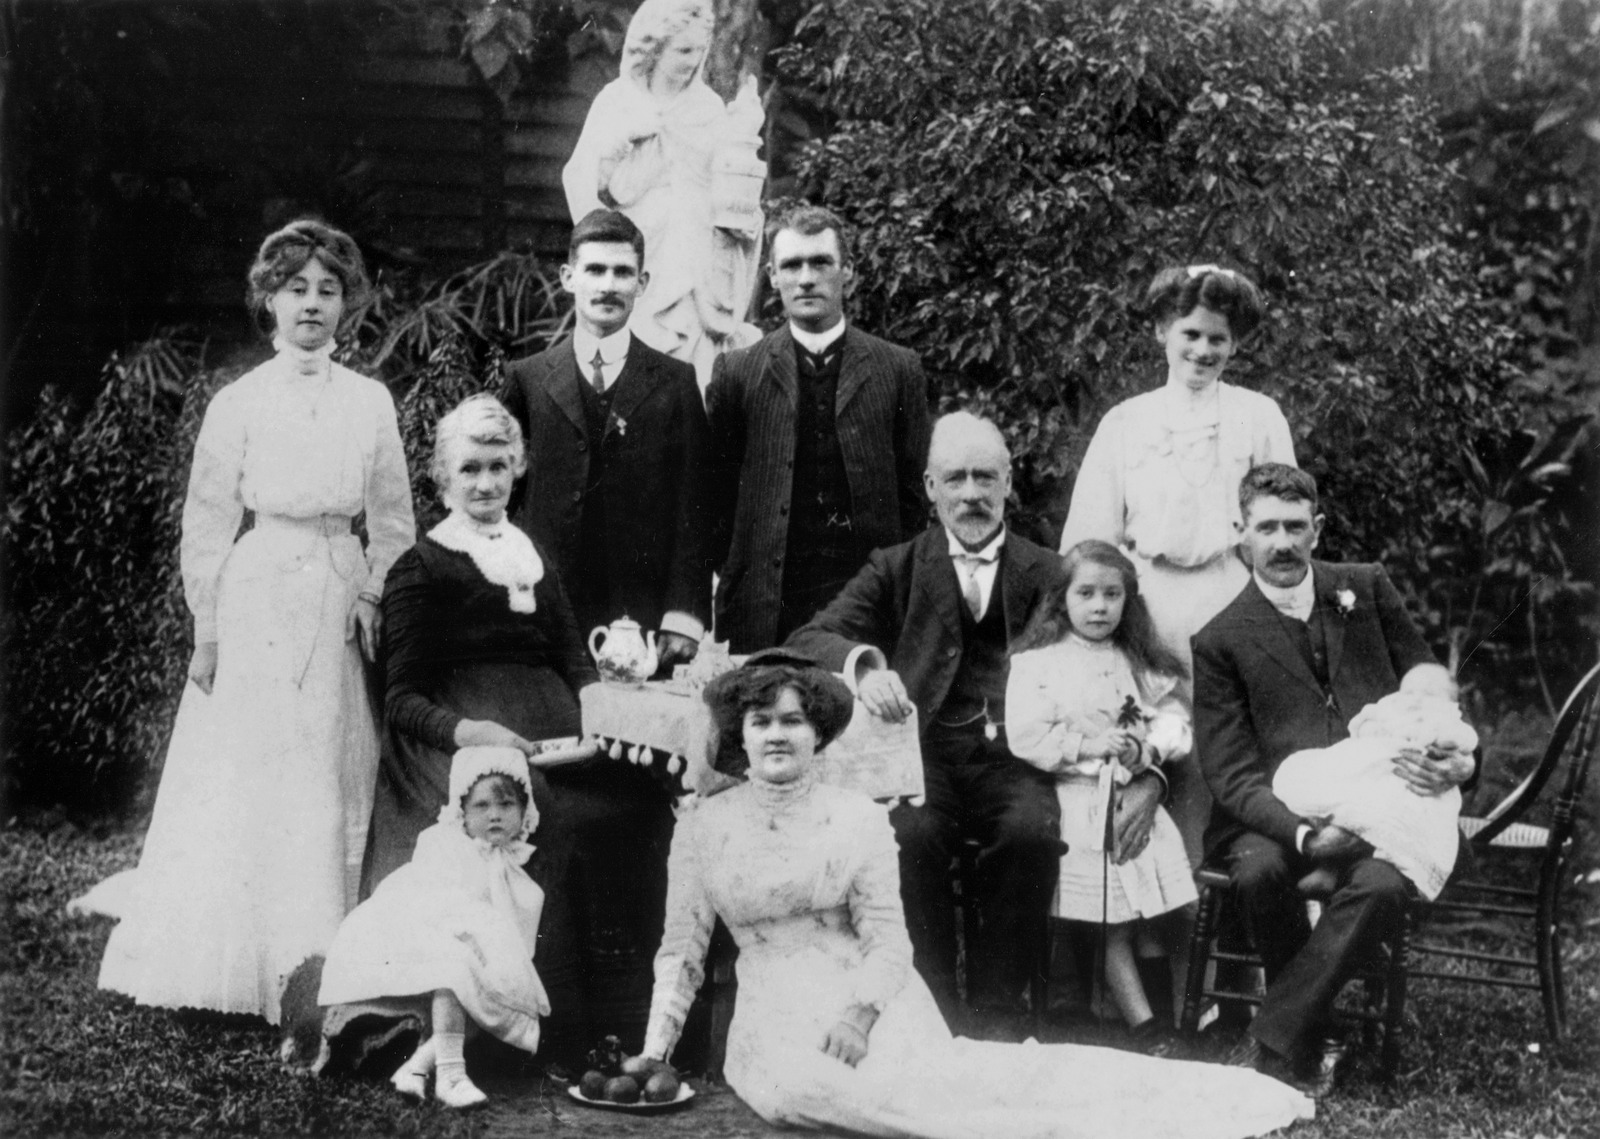 Soutter family pictured in a garden setting, Brisbane, 1910